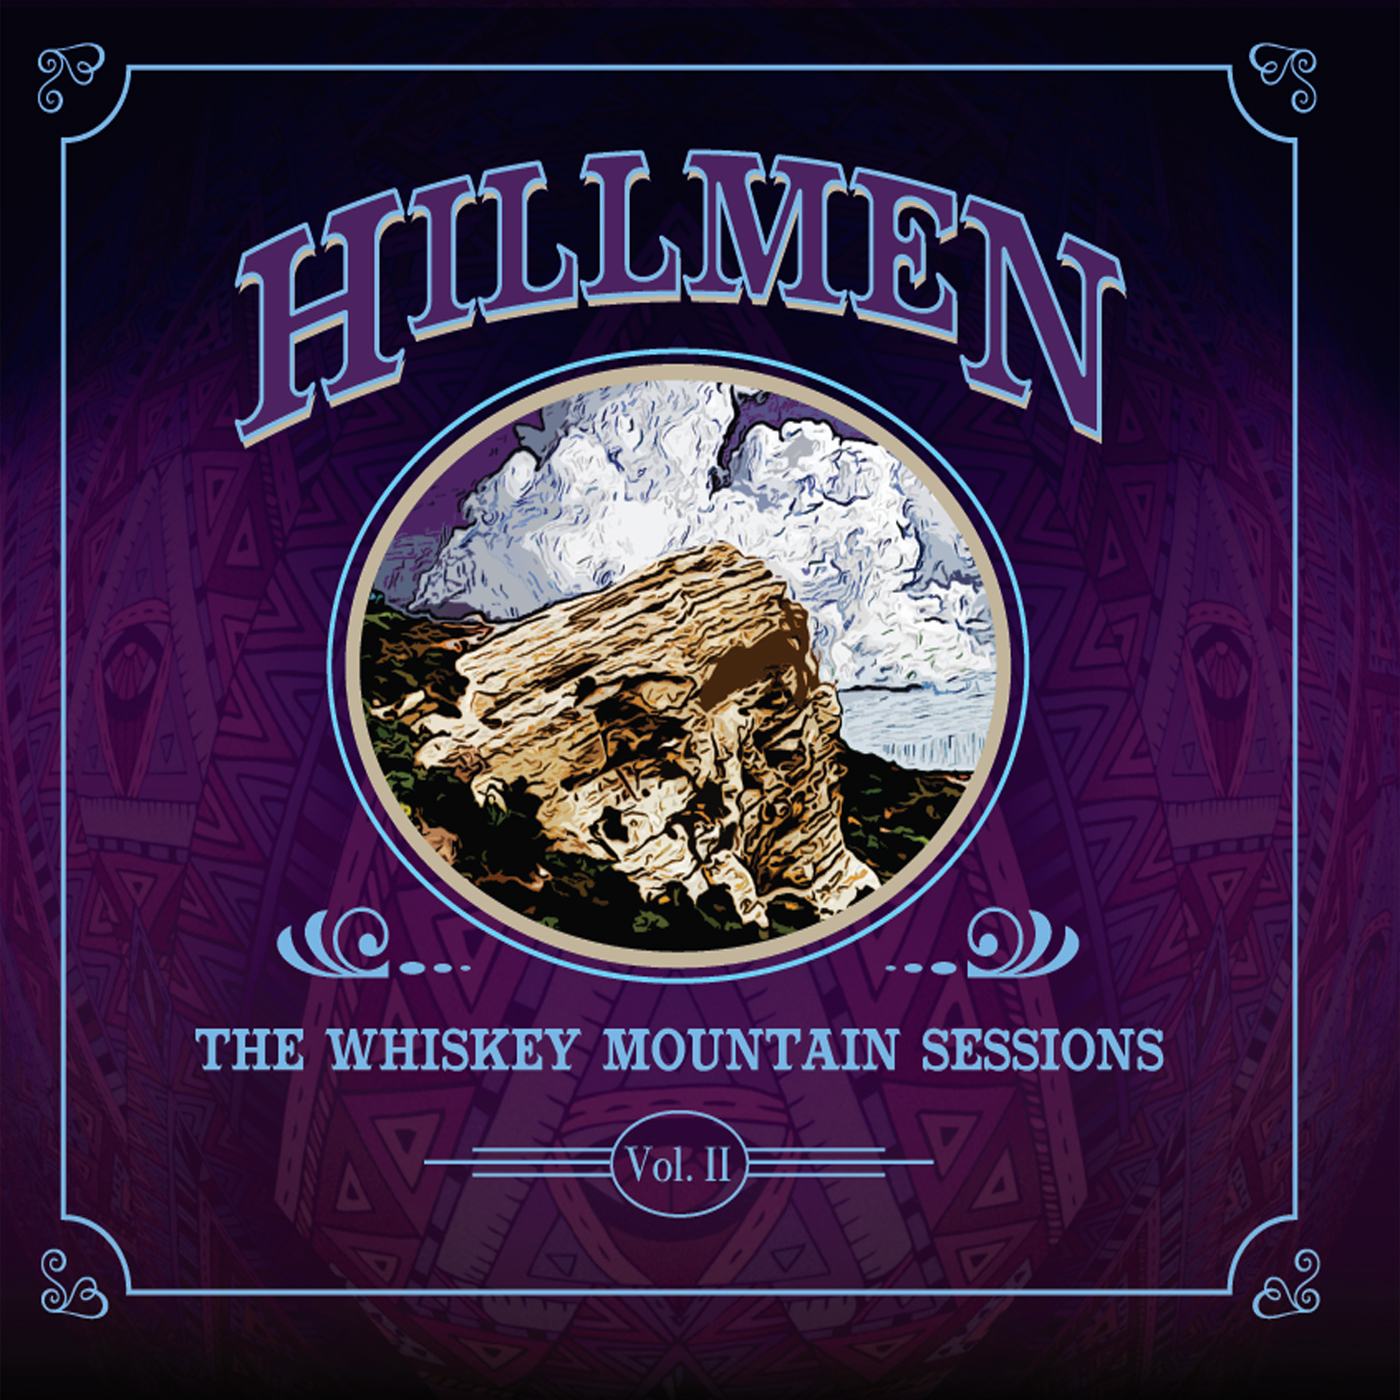 Hillmen: The Whiskey Mountain Sessions Vol. II